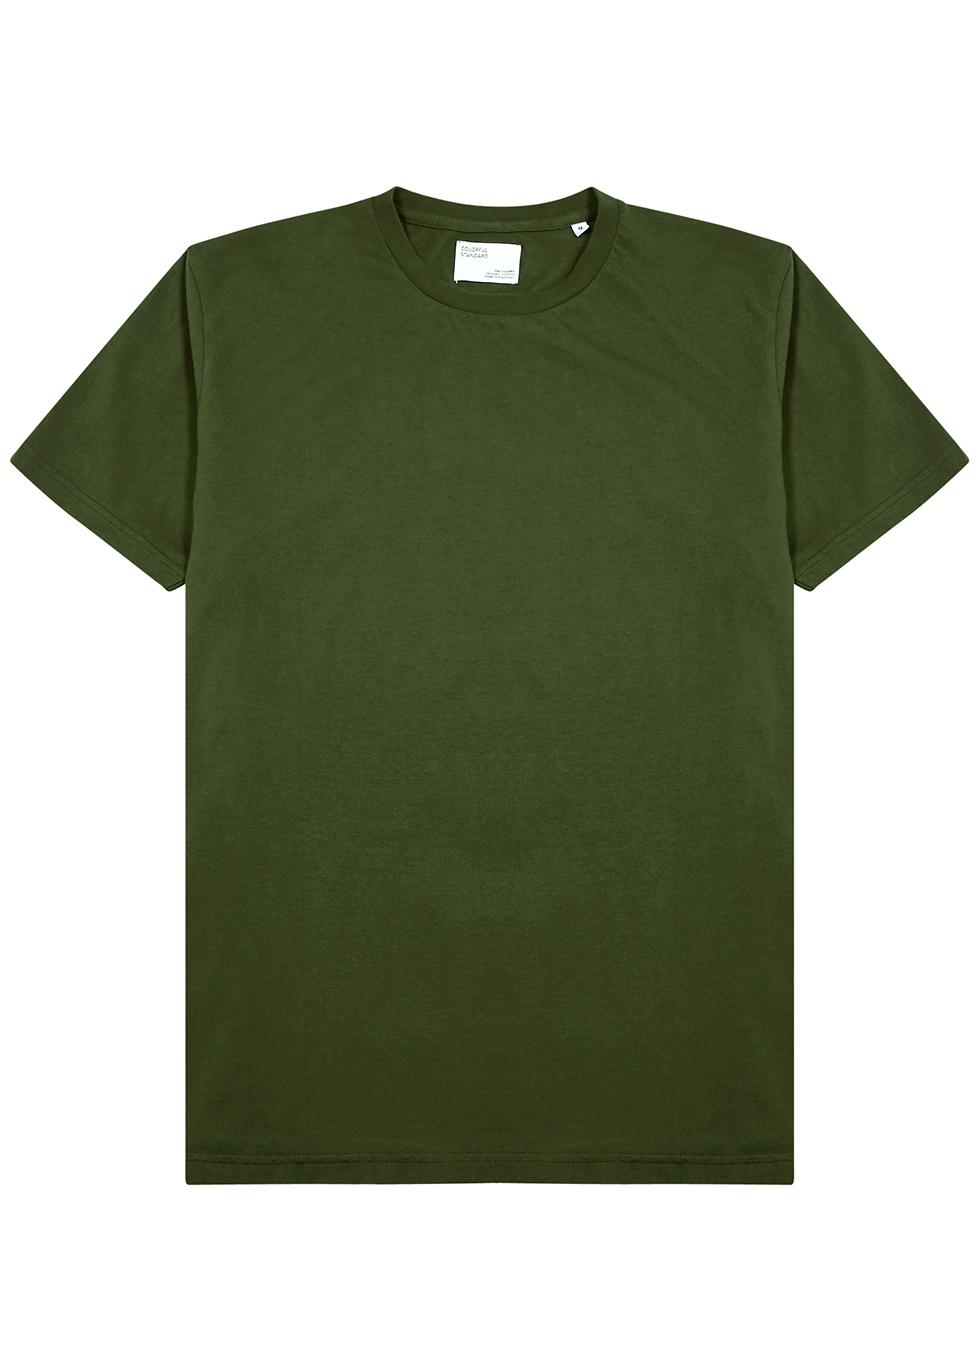 Army green cotton T-shirt by COLORFUL STANDARD